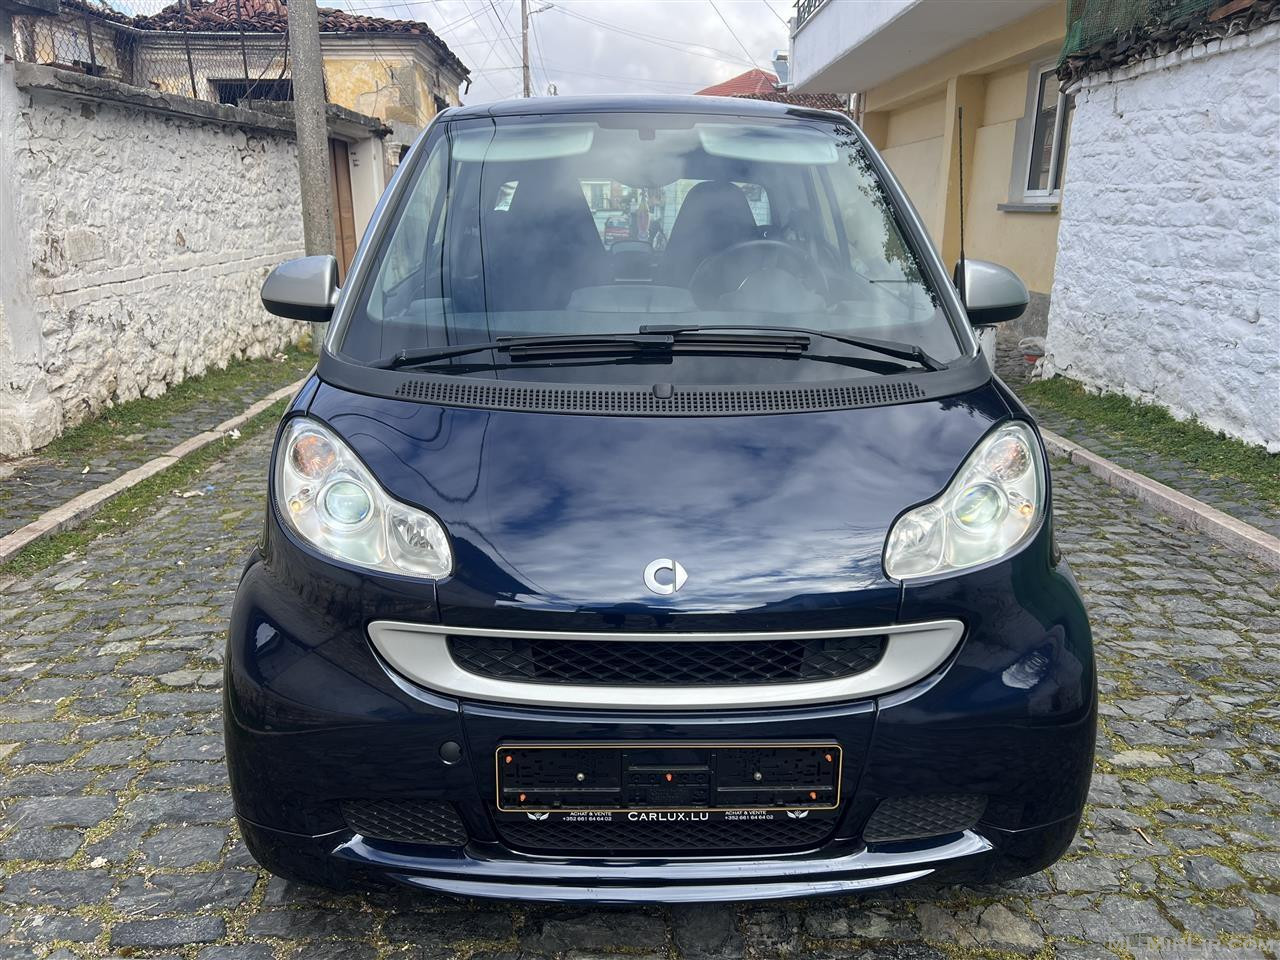 Smart ForTwo 1.0 mhd Eco Automat facelift